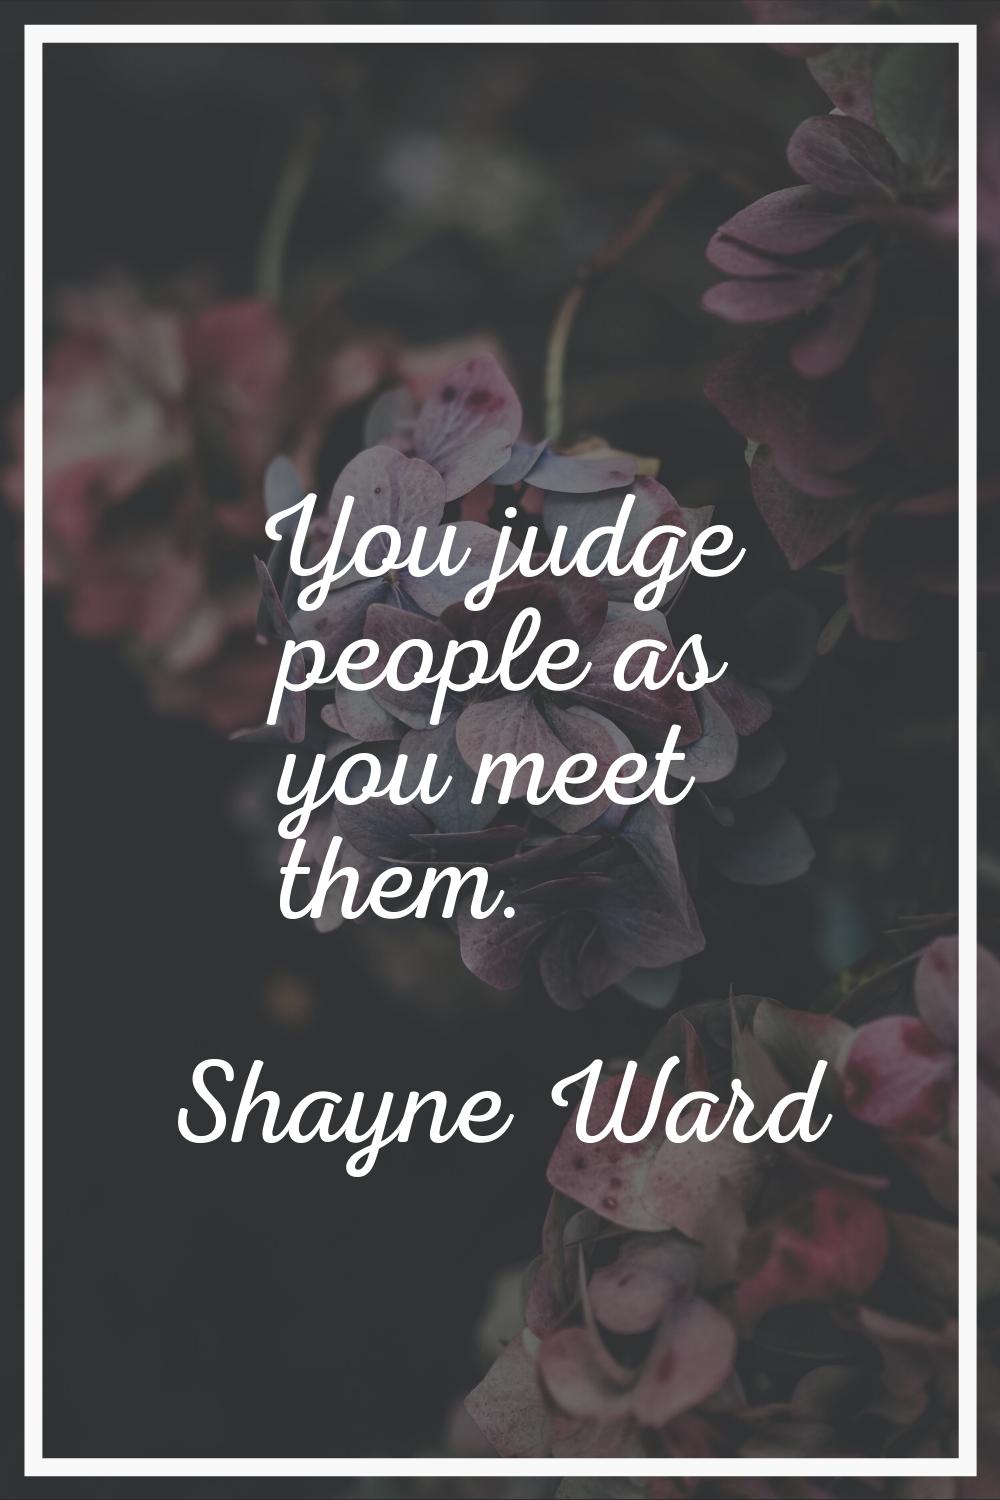 You judge people as you meet them.